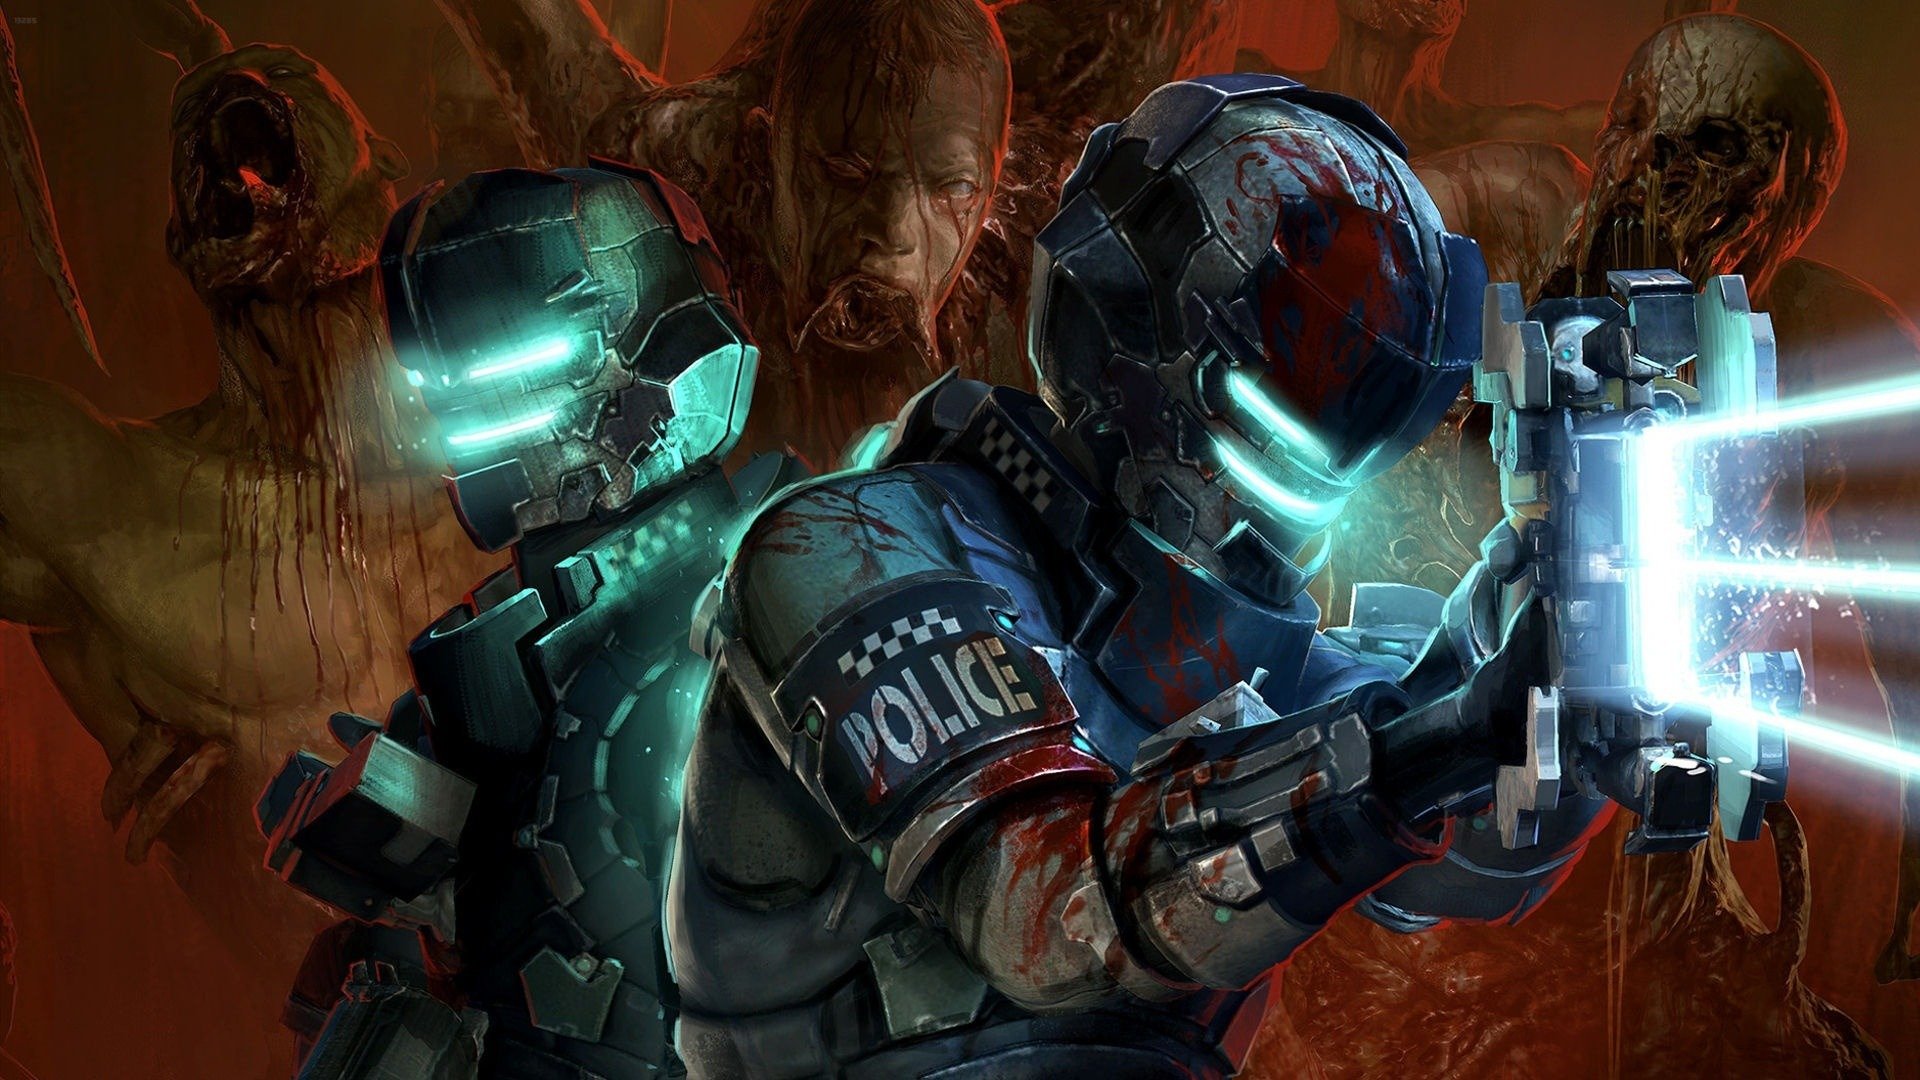 Download full hd 1920x1080 Dead Space PC background ID:211593 for free